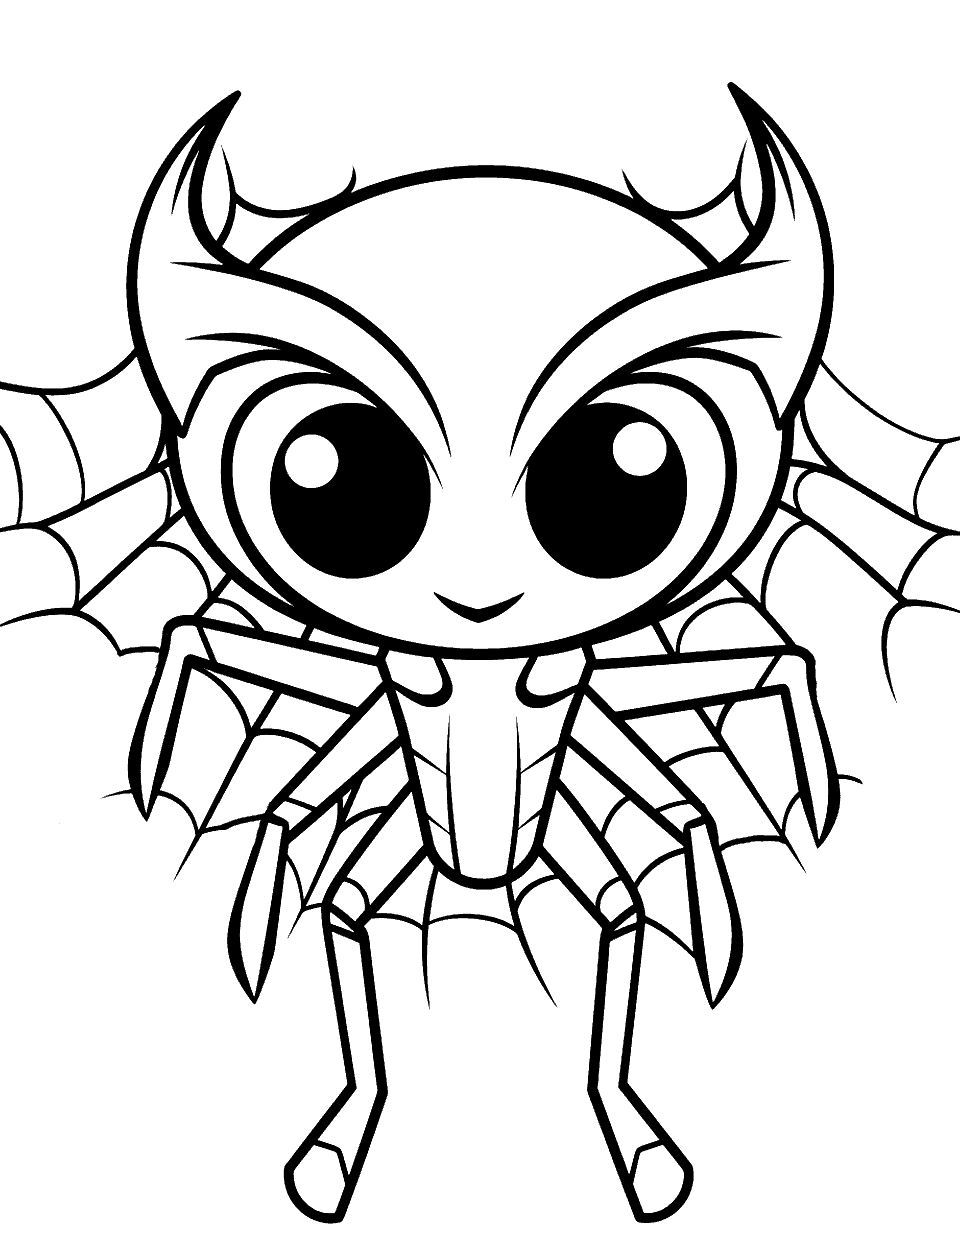 Spider Superhero Coloring Page - A spider dressed in a superhero costume, ready for action.